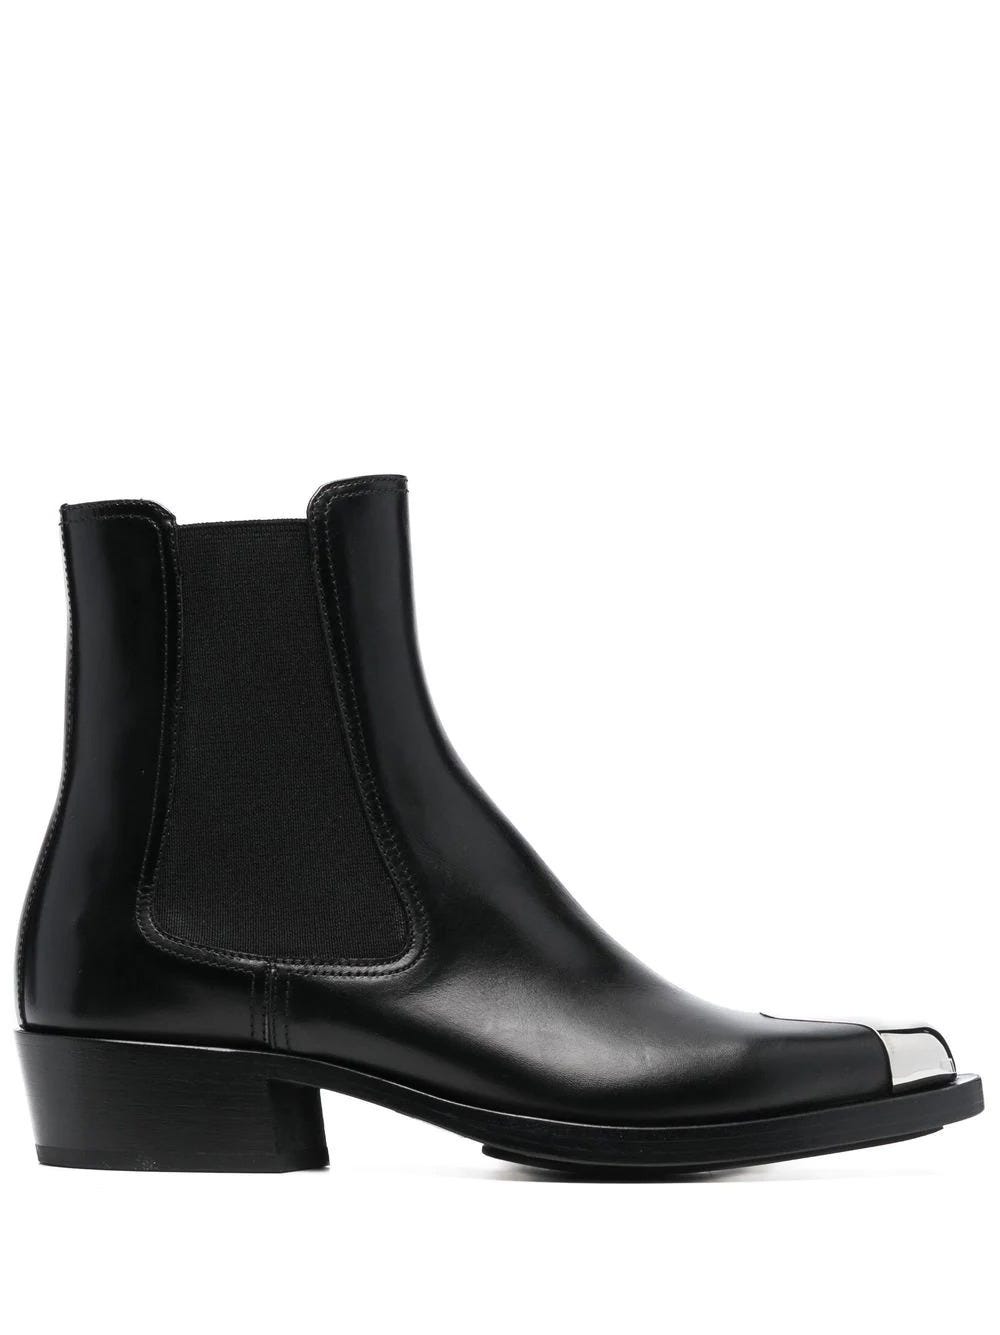 ALEXANDER MCQUEEN BLACK ANKLE BOOT WITH METAL TOE